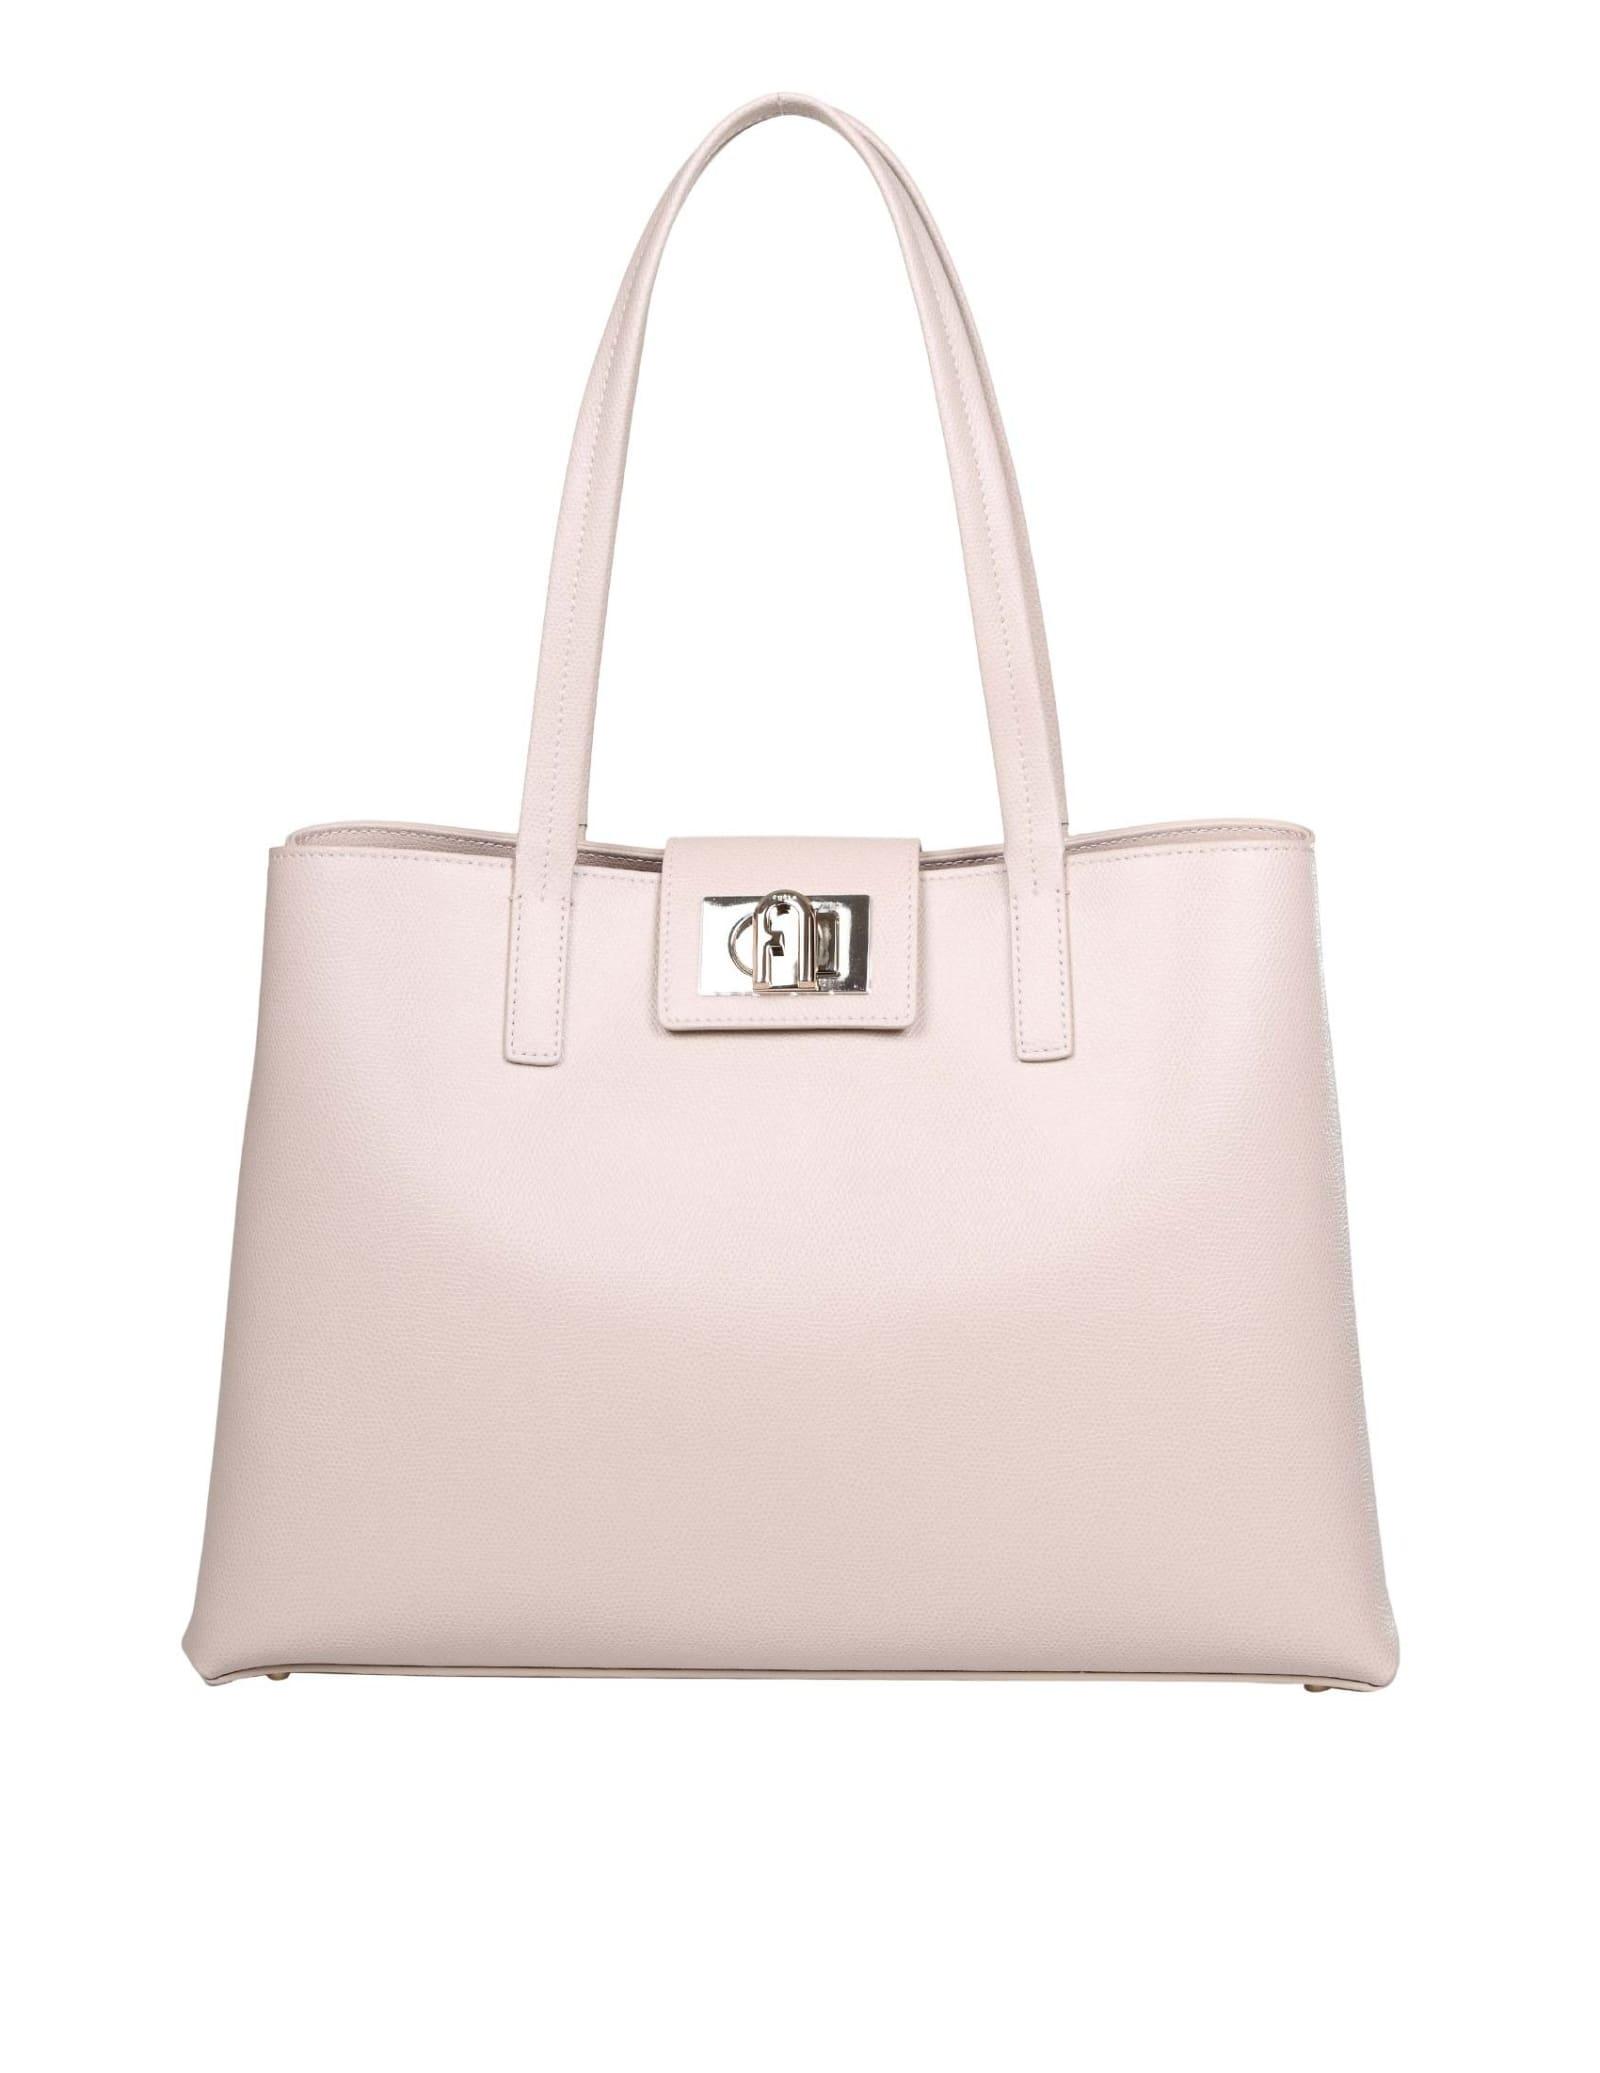 Furla Shopping 1927 L Ballerina Leather Tote in Pink | Lyst